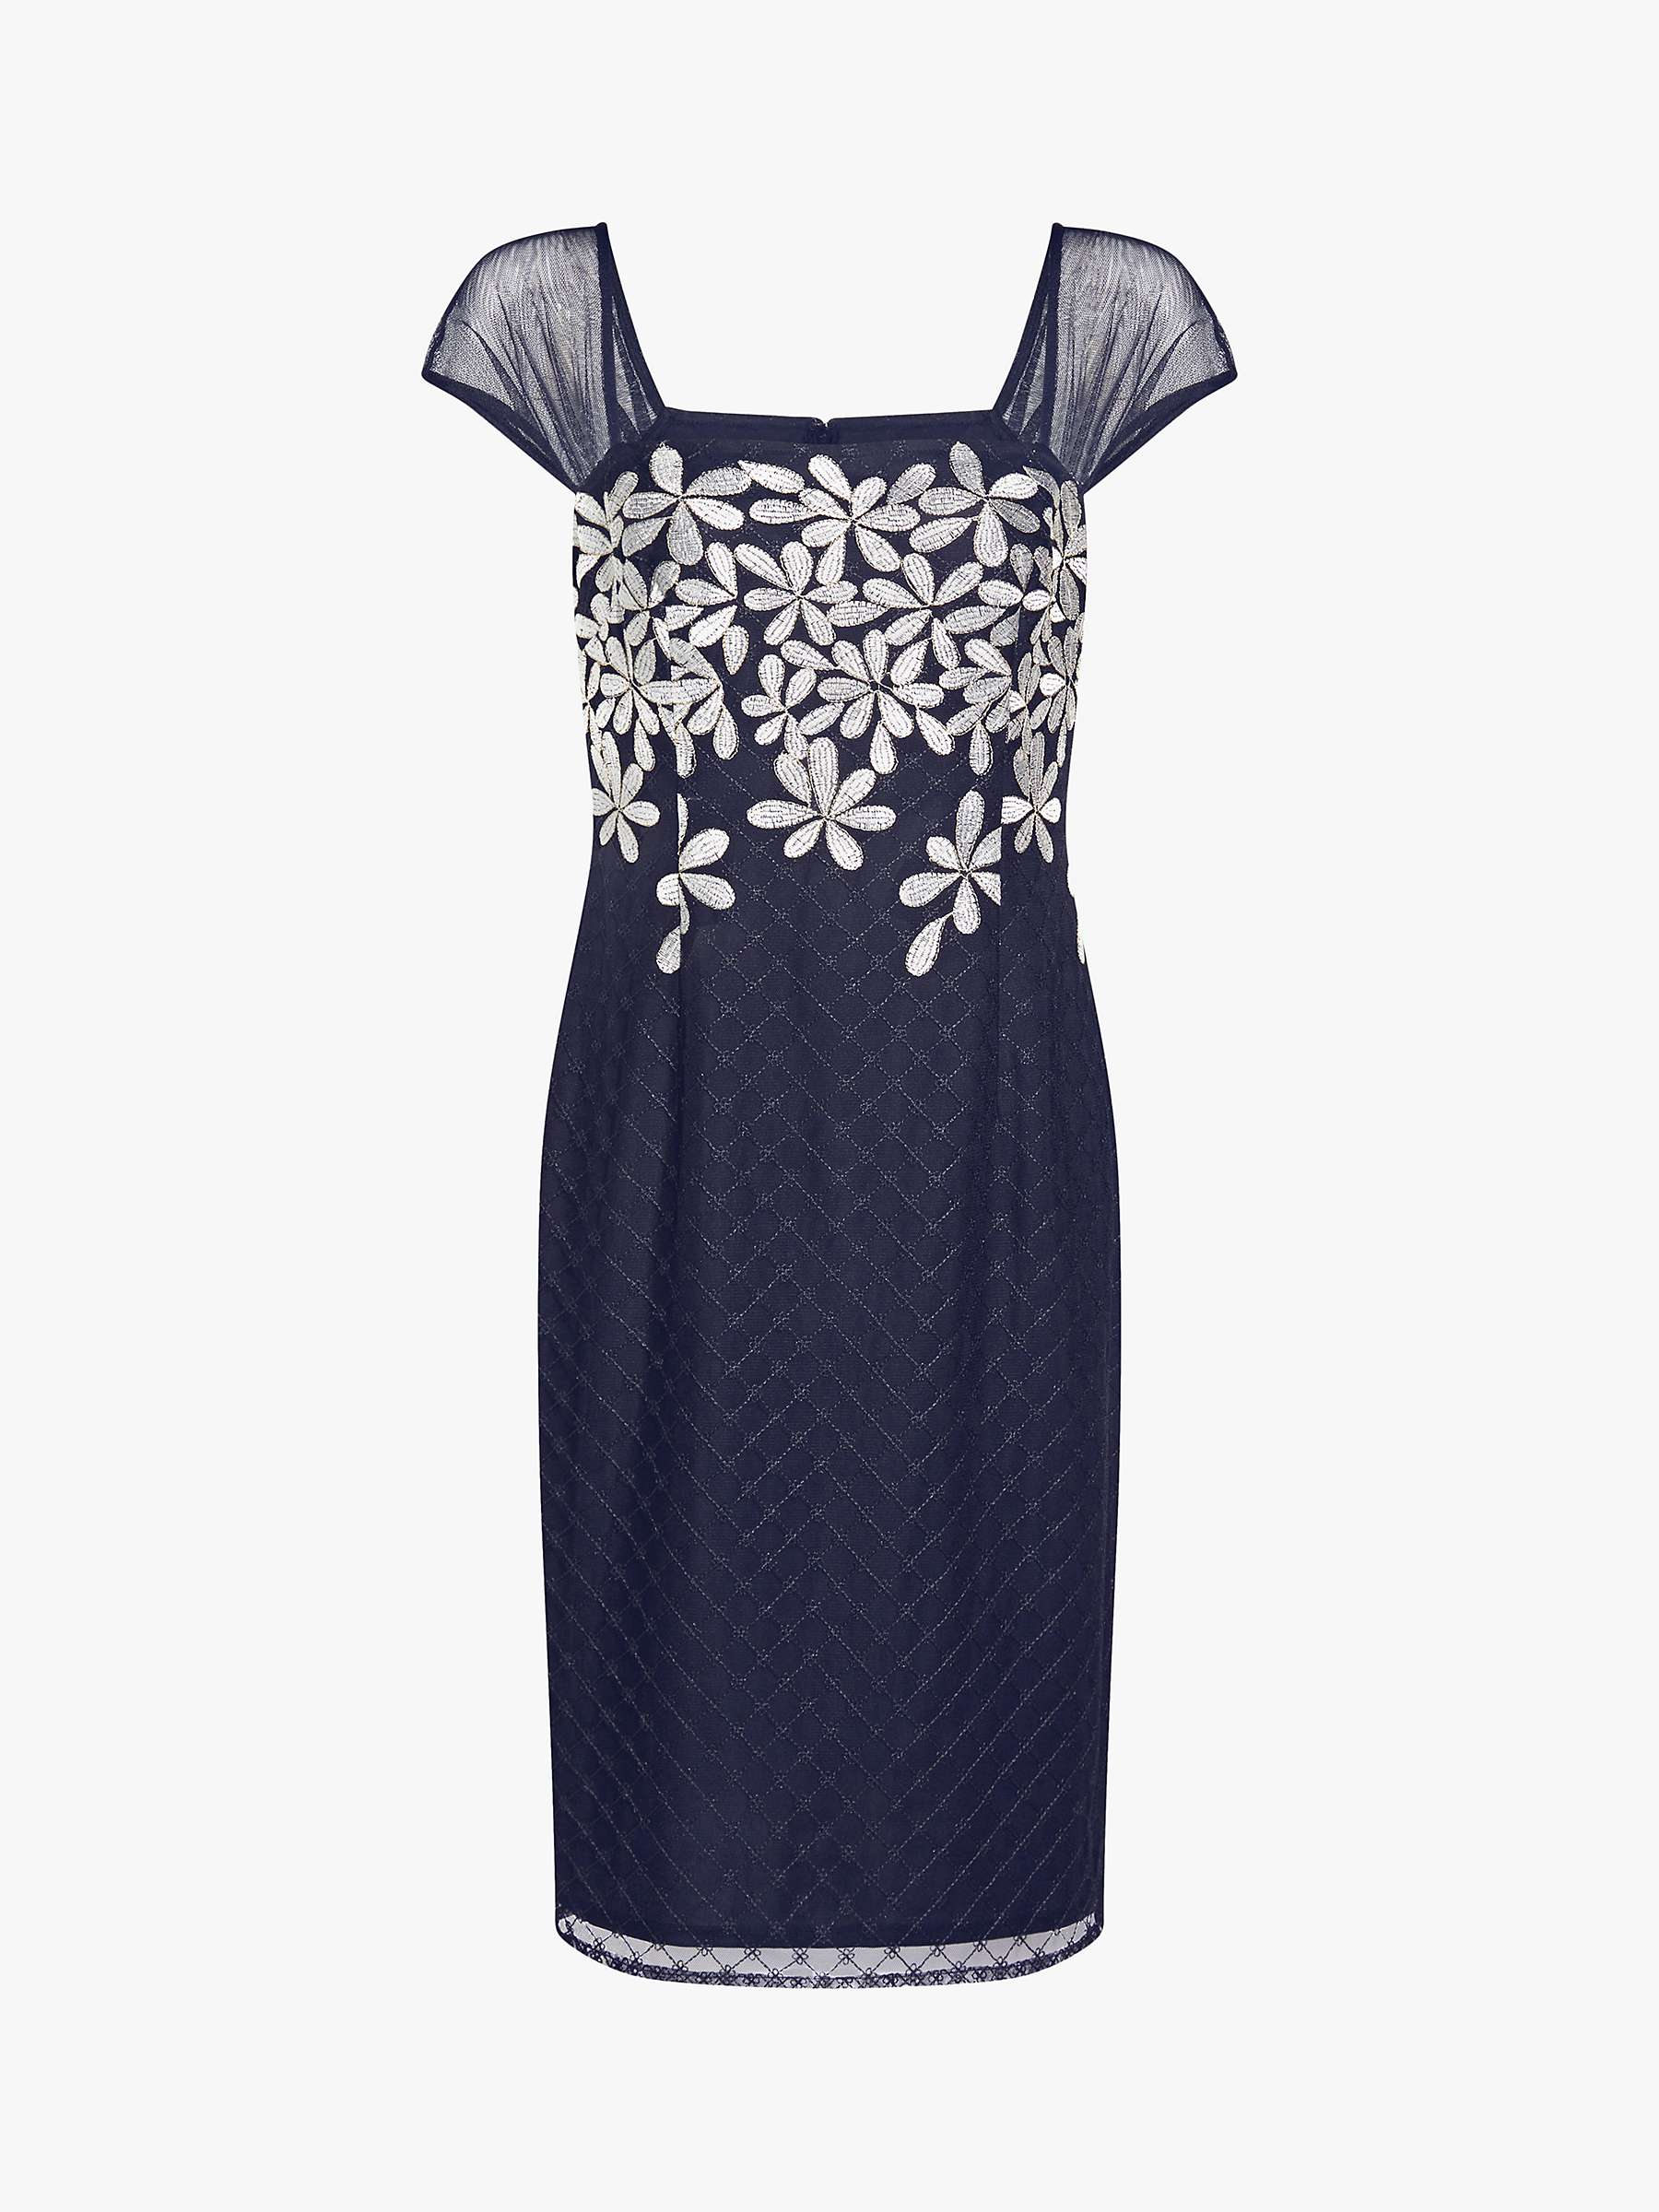 Buy Adrianna Papell Embroidered Floral Cap Sleeve Dress, Navy/Ivory Online at johnlewis.com